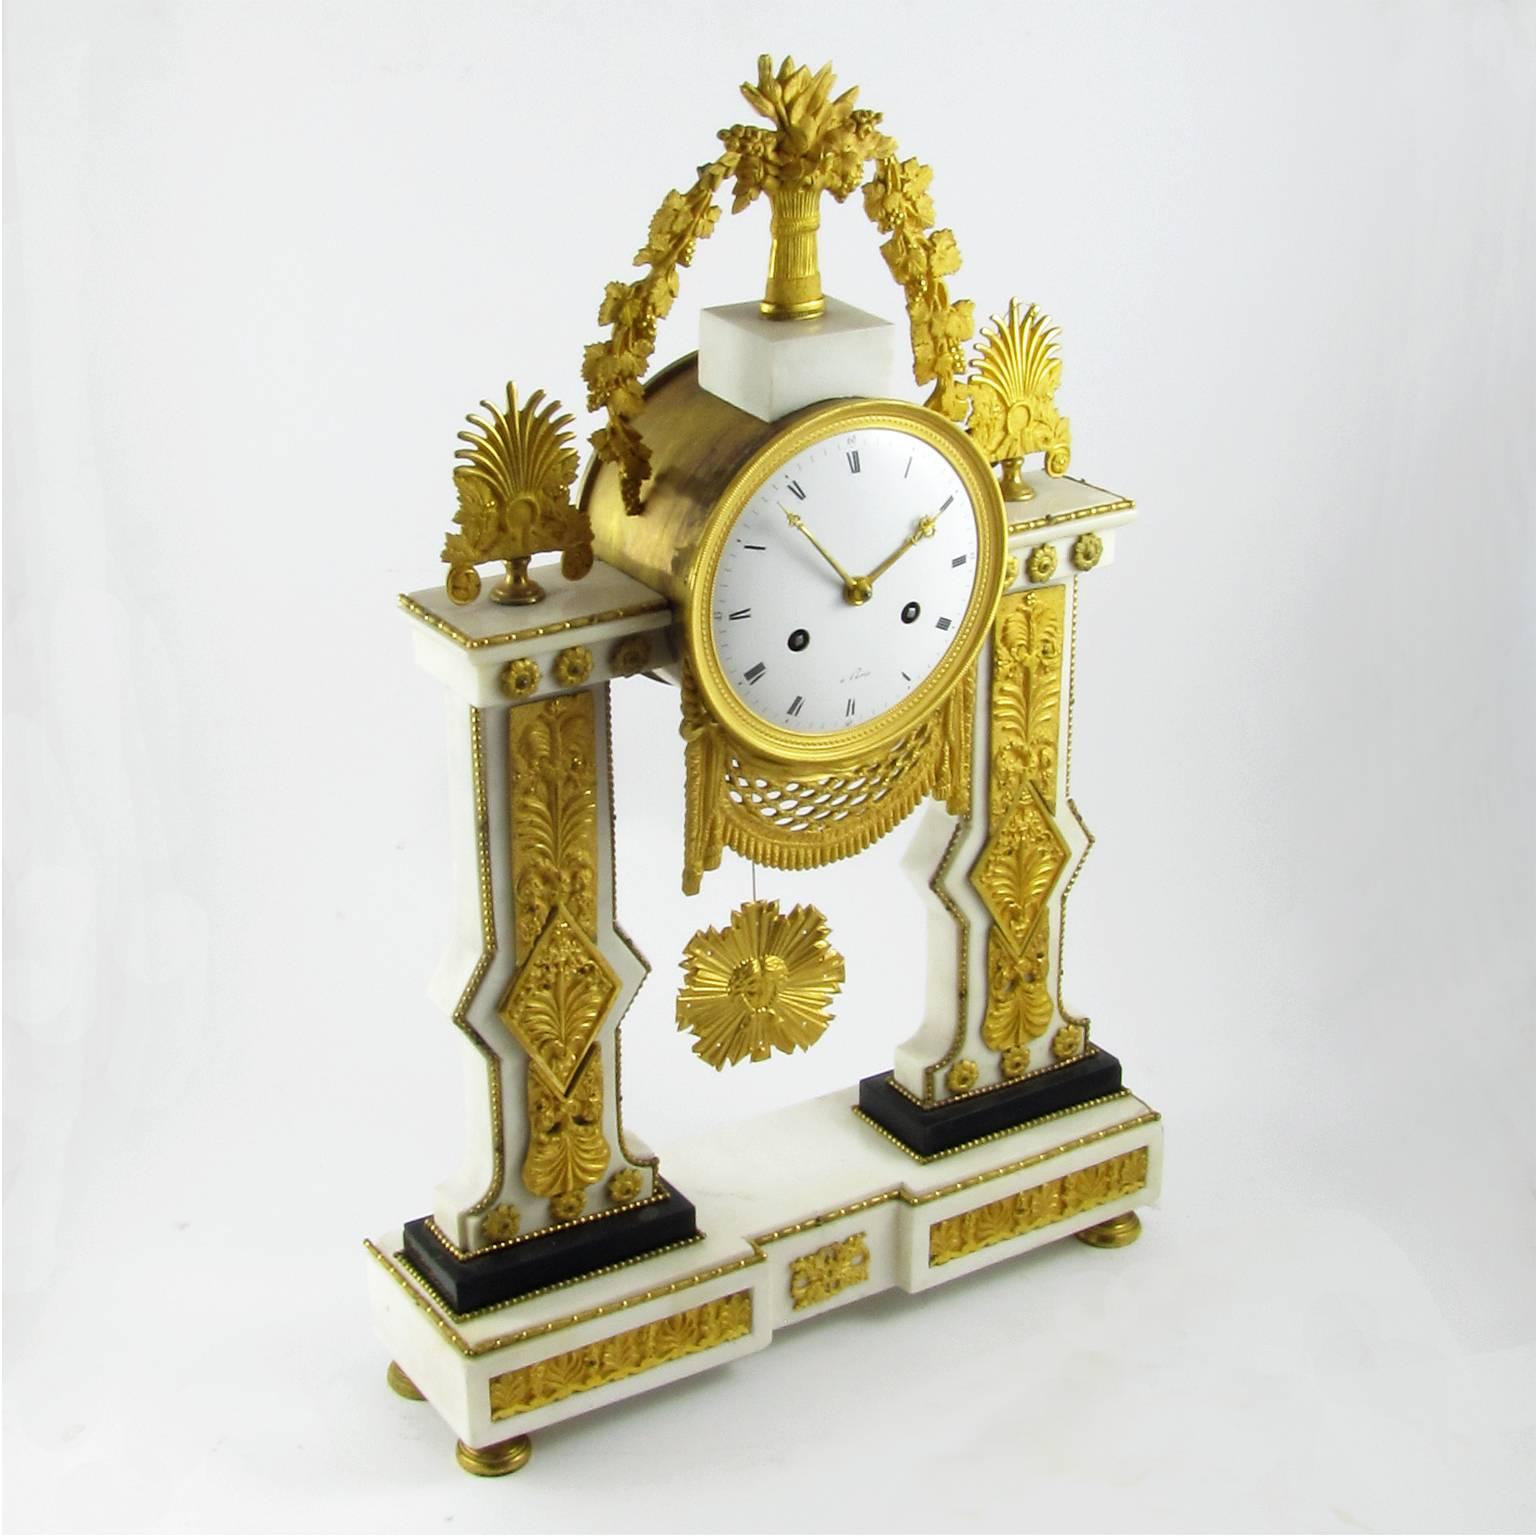 A rare white marble and ormolu gilt mantel clock with a beautiful architectural structure. The large marble base on circular bronze feet is surmounted by two lateral pilasters with classical style decorations, friezes and potted flowers. Circular